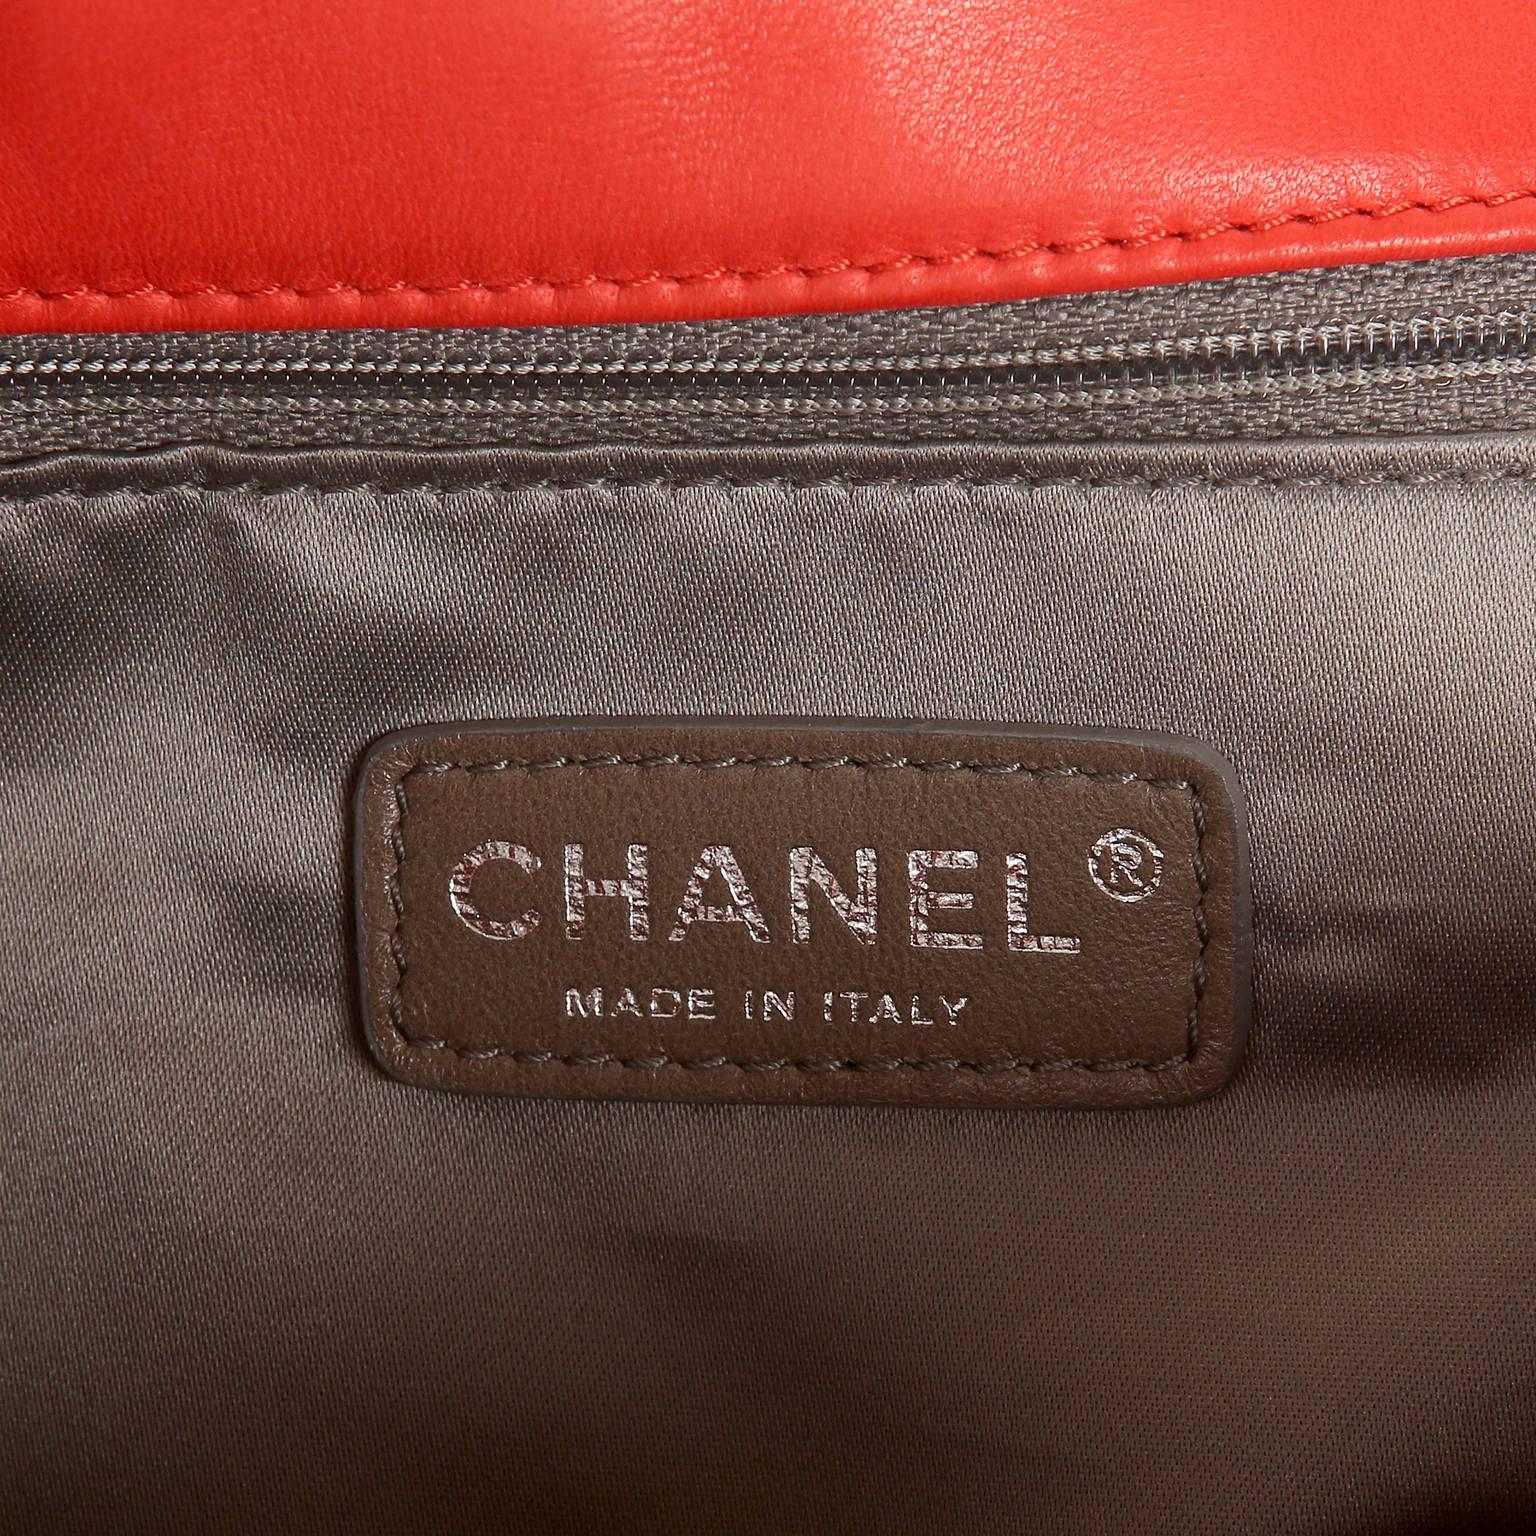 Chanel Red Leather Walk of Fame Flap Bag 2